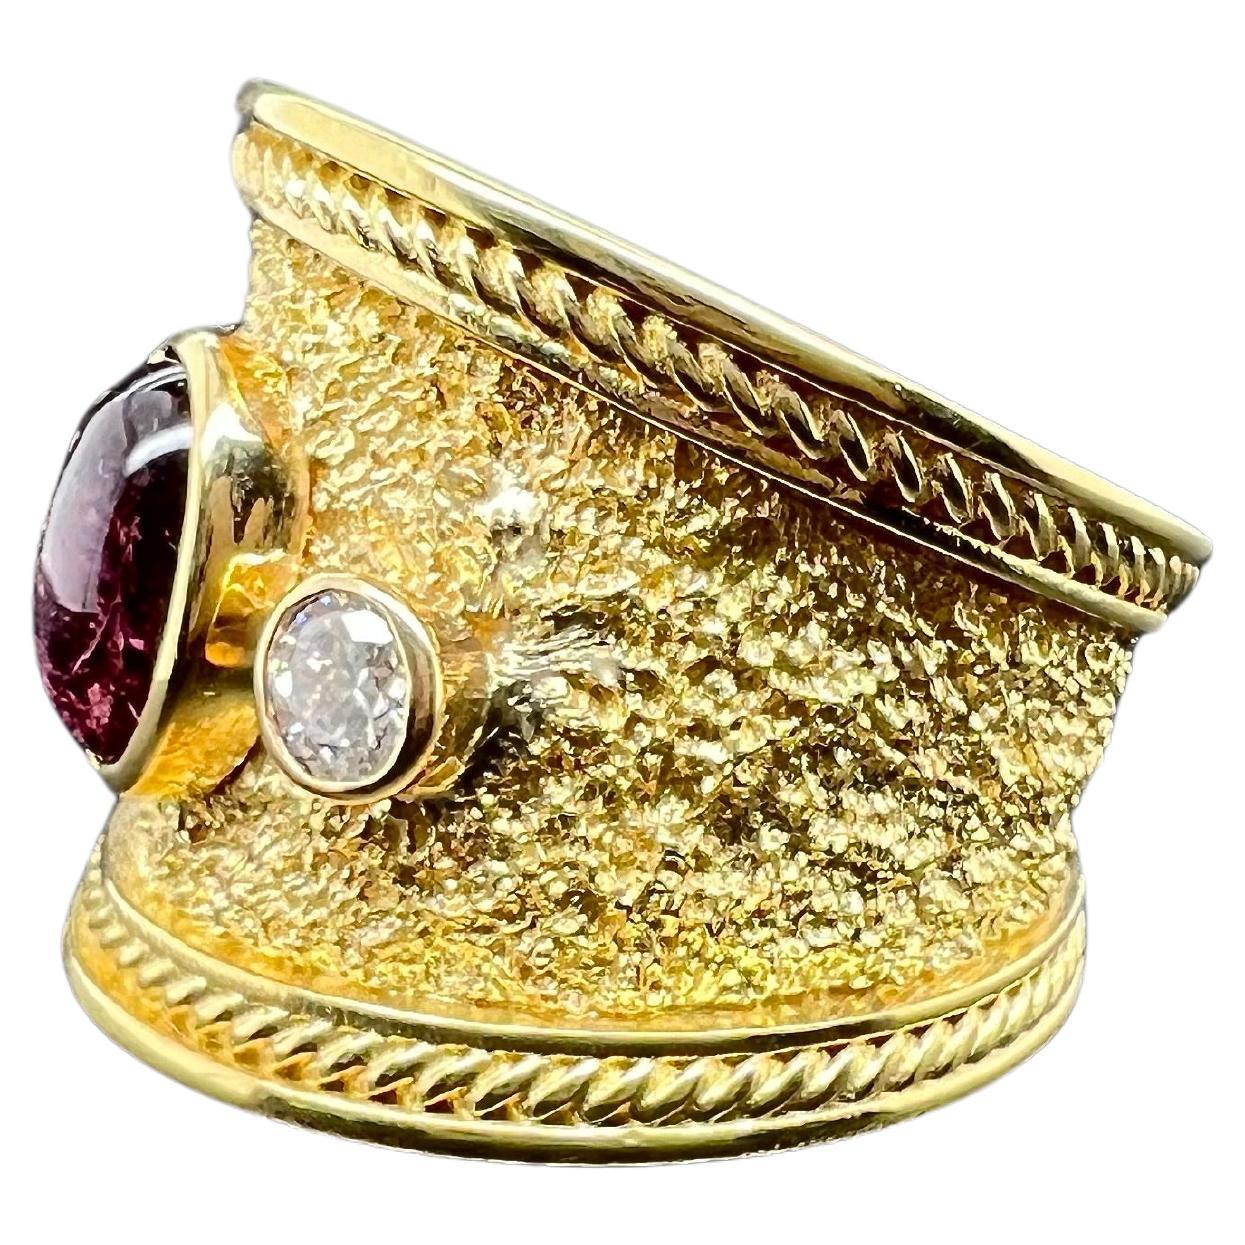 This amazing cigar band style pink cabochon tourmaline ring will be the talk of the town! The textured band offsets the illustrious round diamonds and the glowing pink tourmaline cabochon. The wide band along with the rope style texture makes the